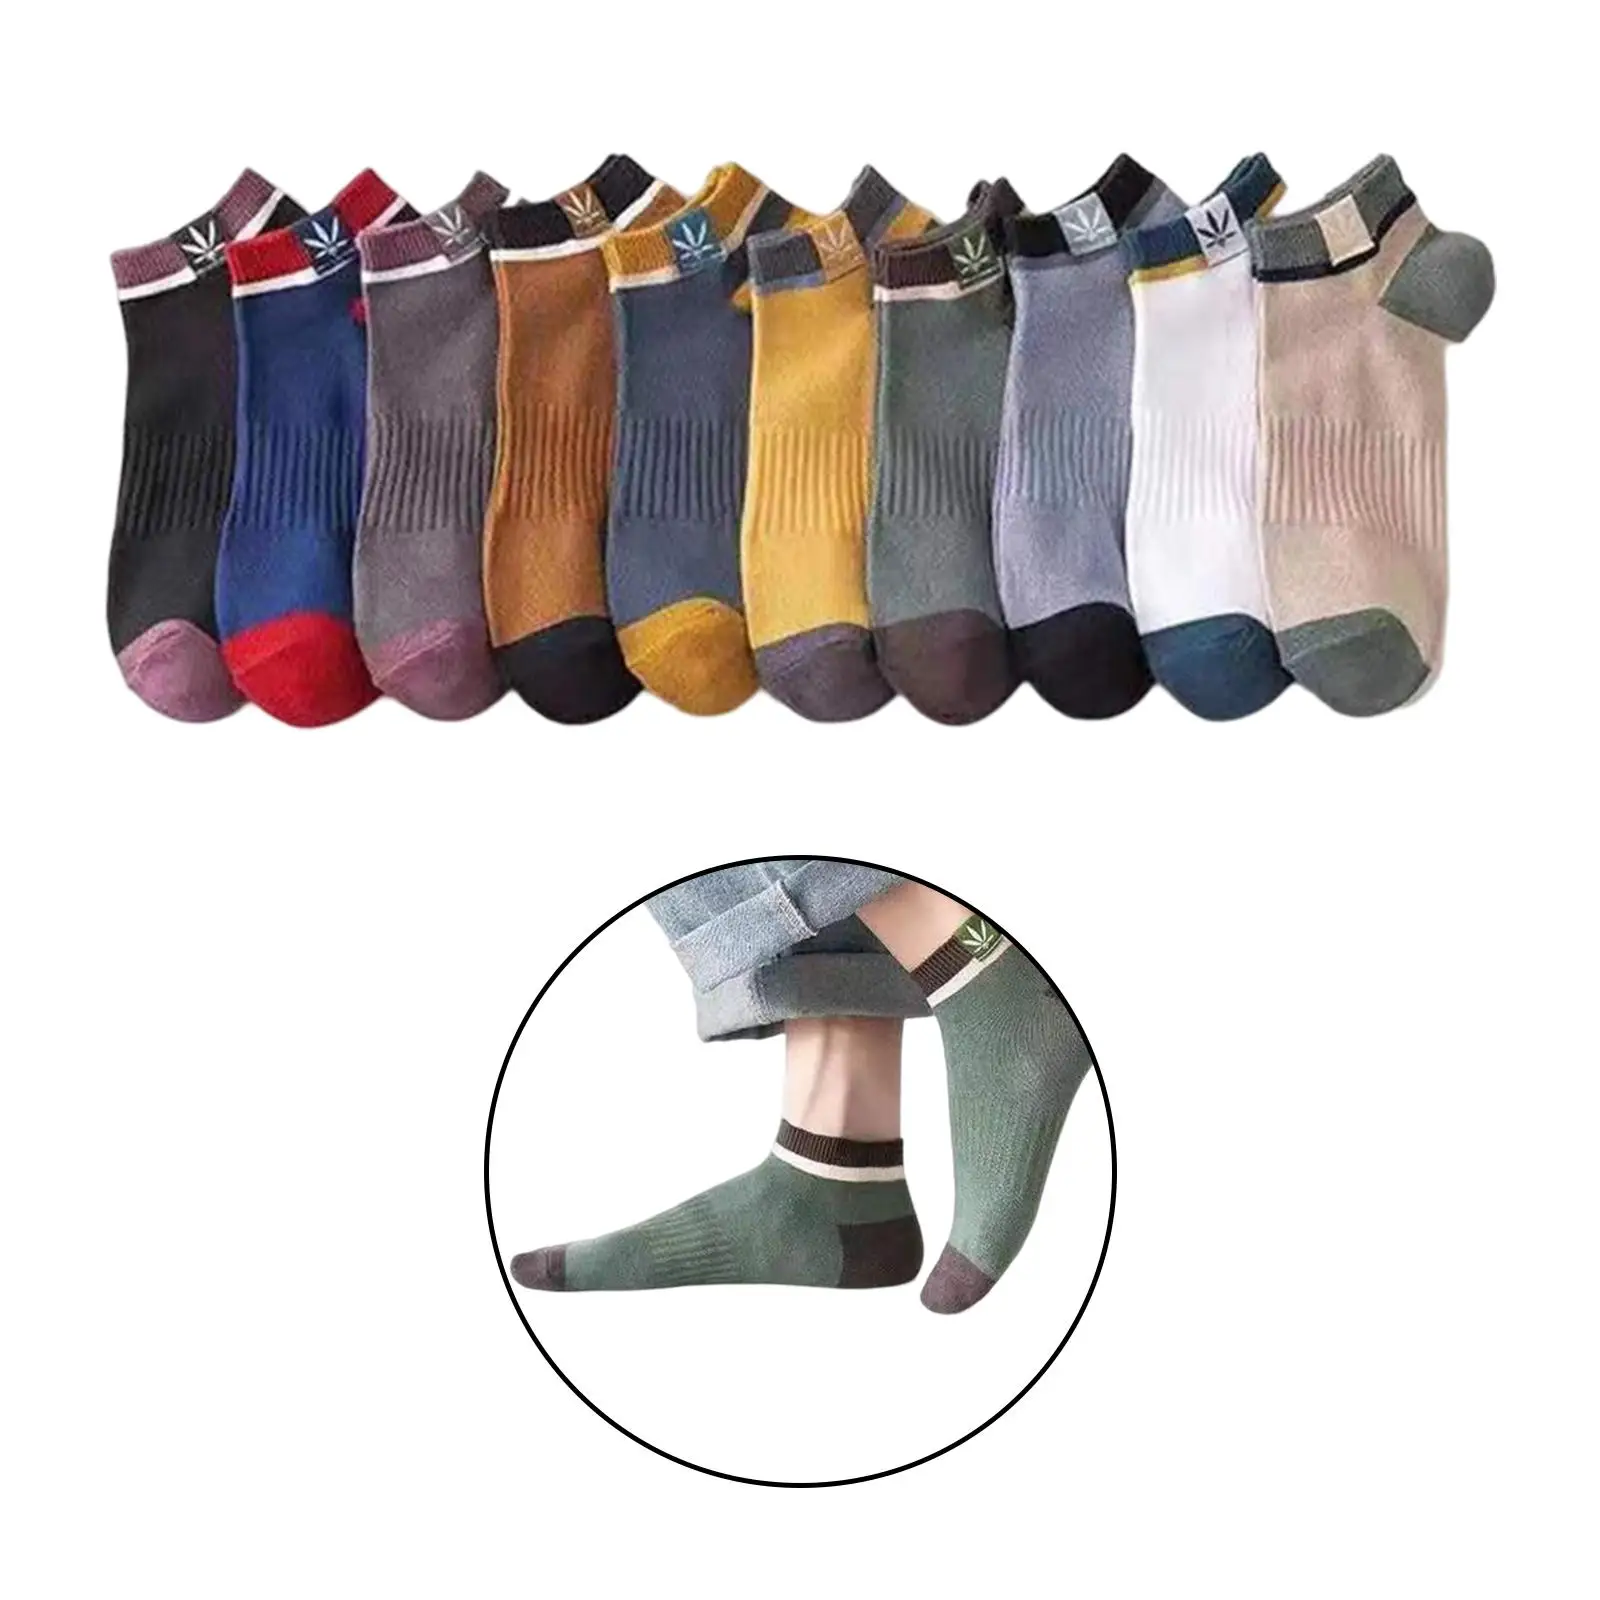 10 Pairs Mens Ankle Socks Soft Low Cut Sweat Wicking Casual Socks for Sports Men Women